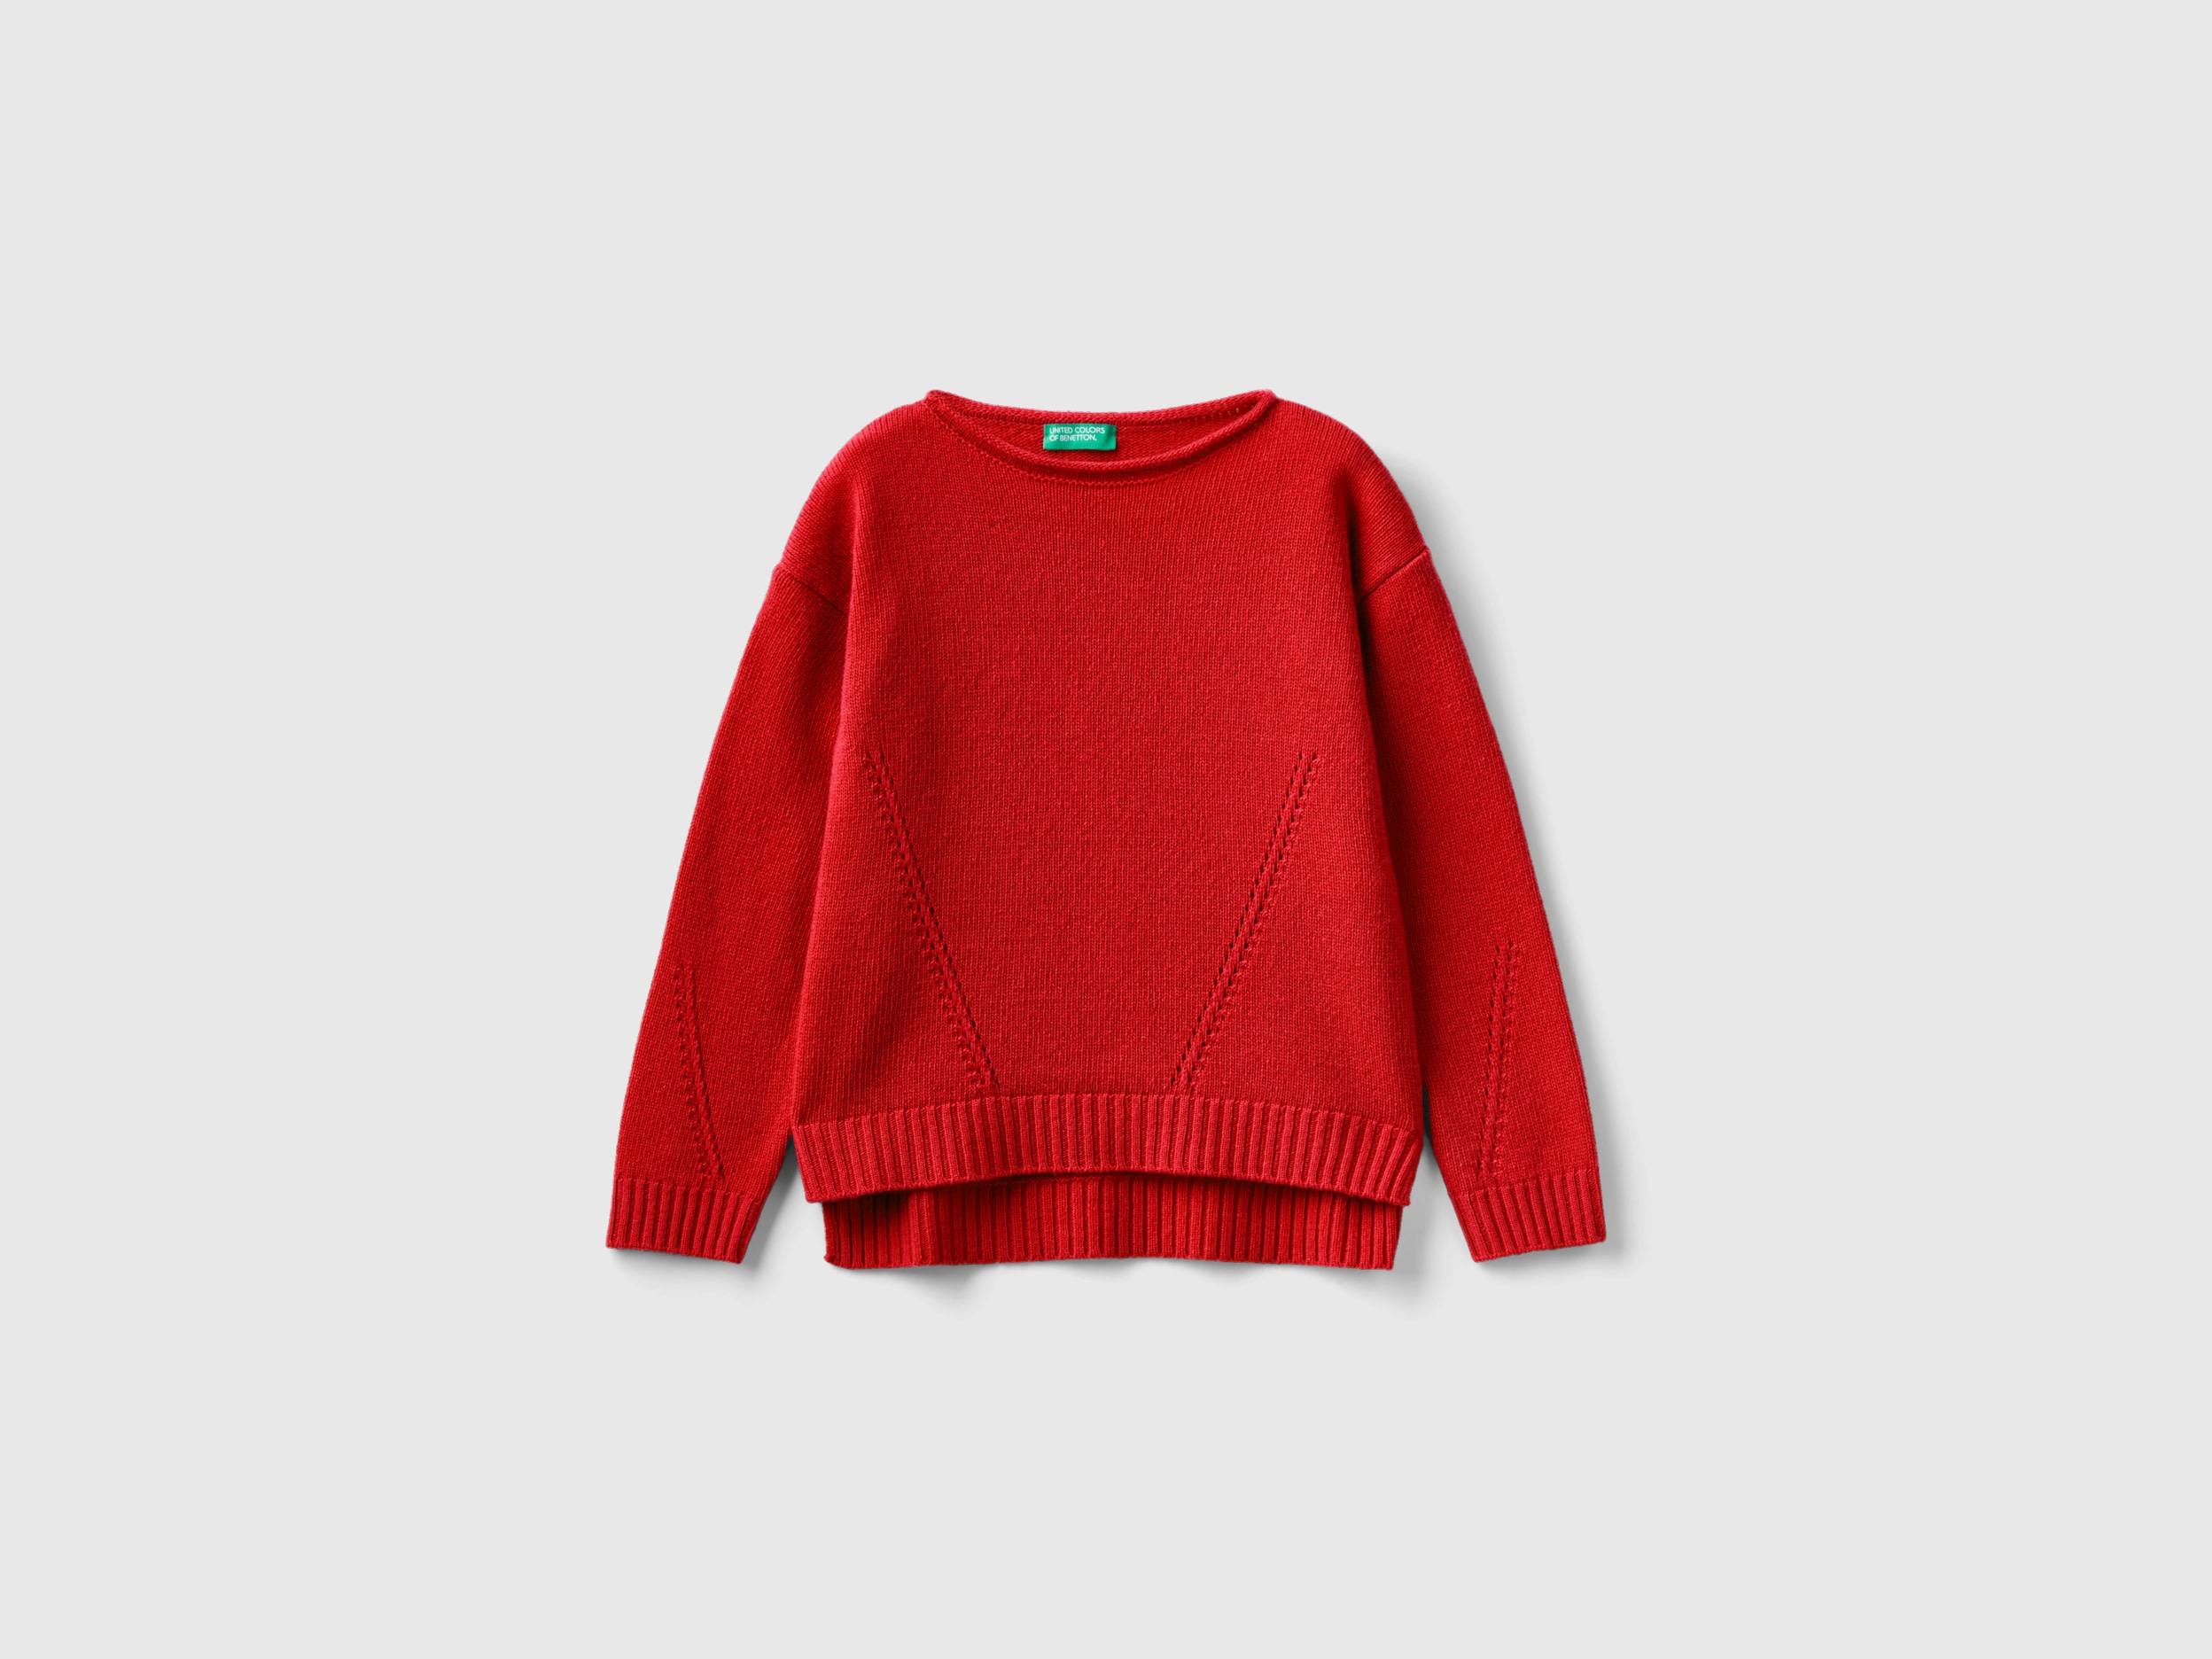 Benetton, Knit Sweater With Playful Stitching, size L, Red, Kids